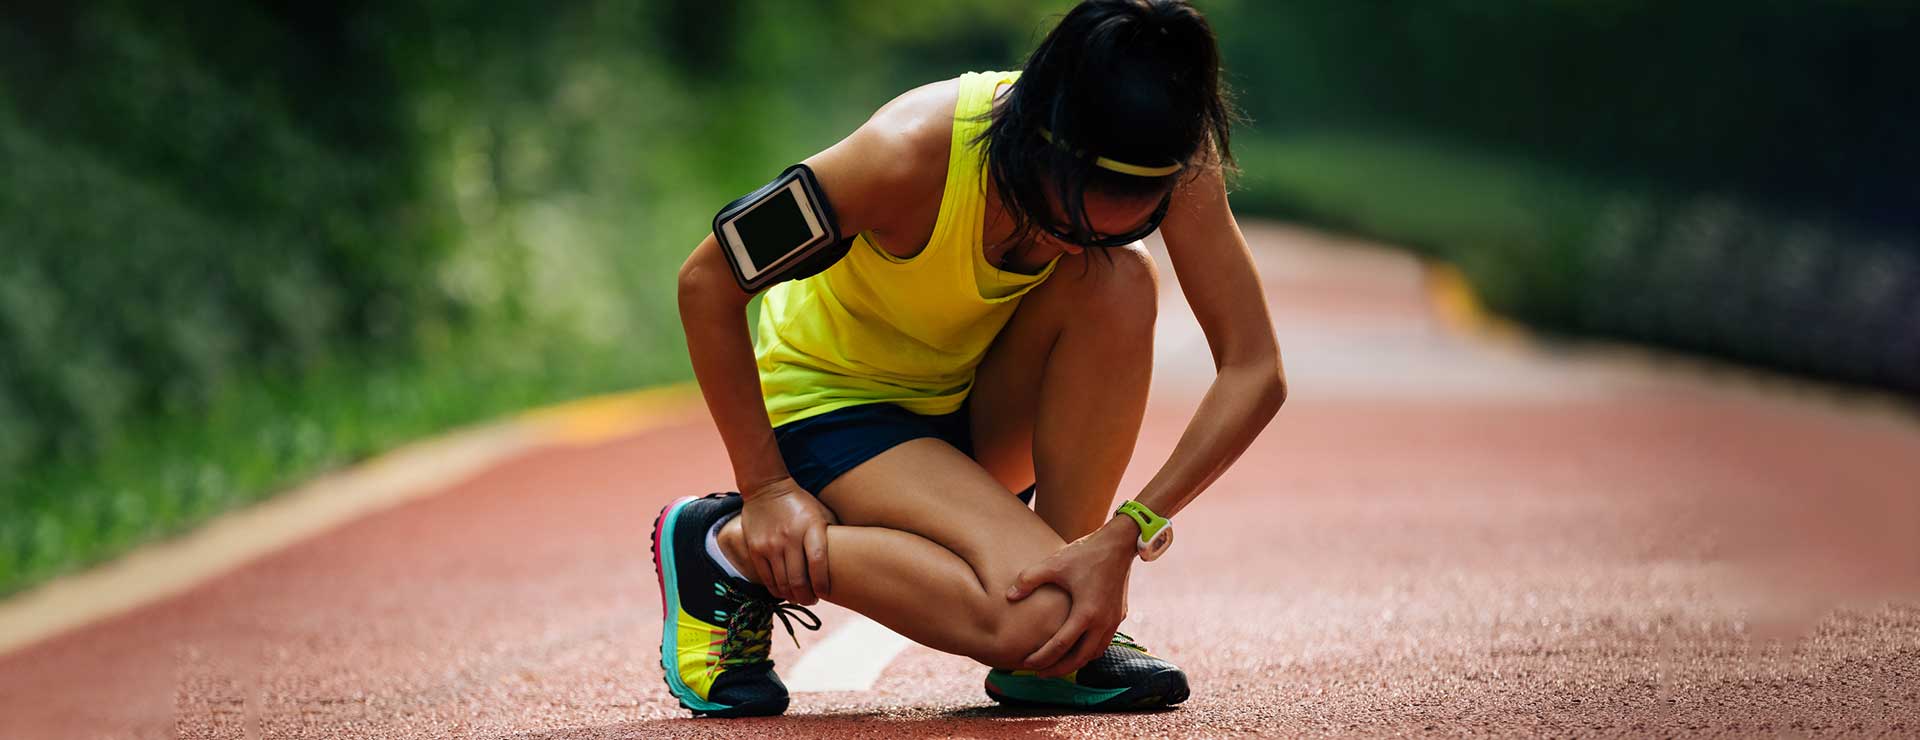 ACL injuries in female athletes - YouTube